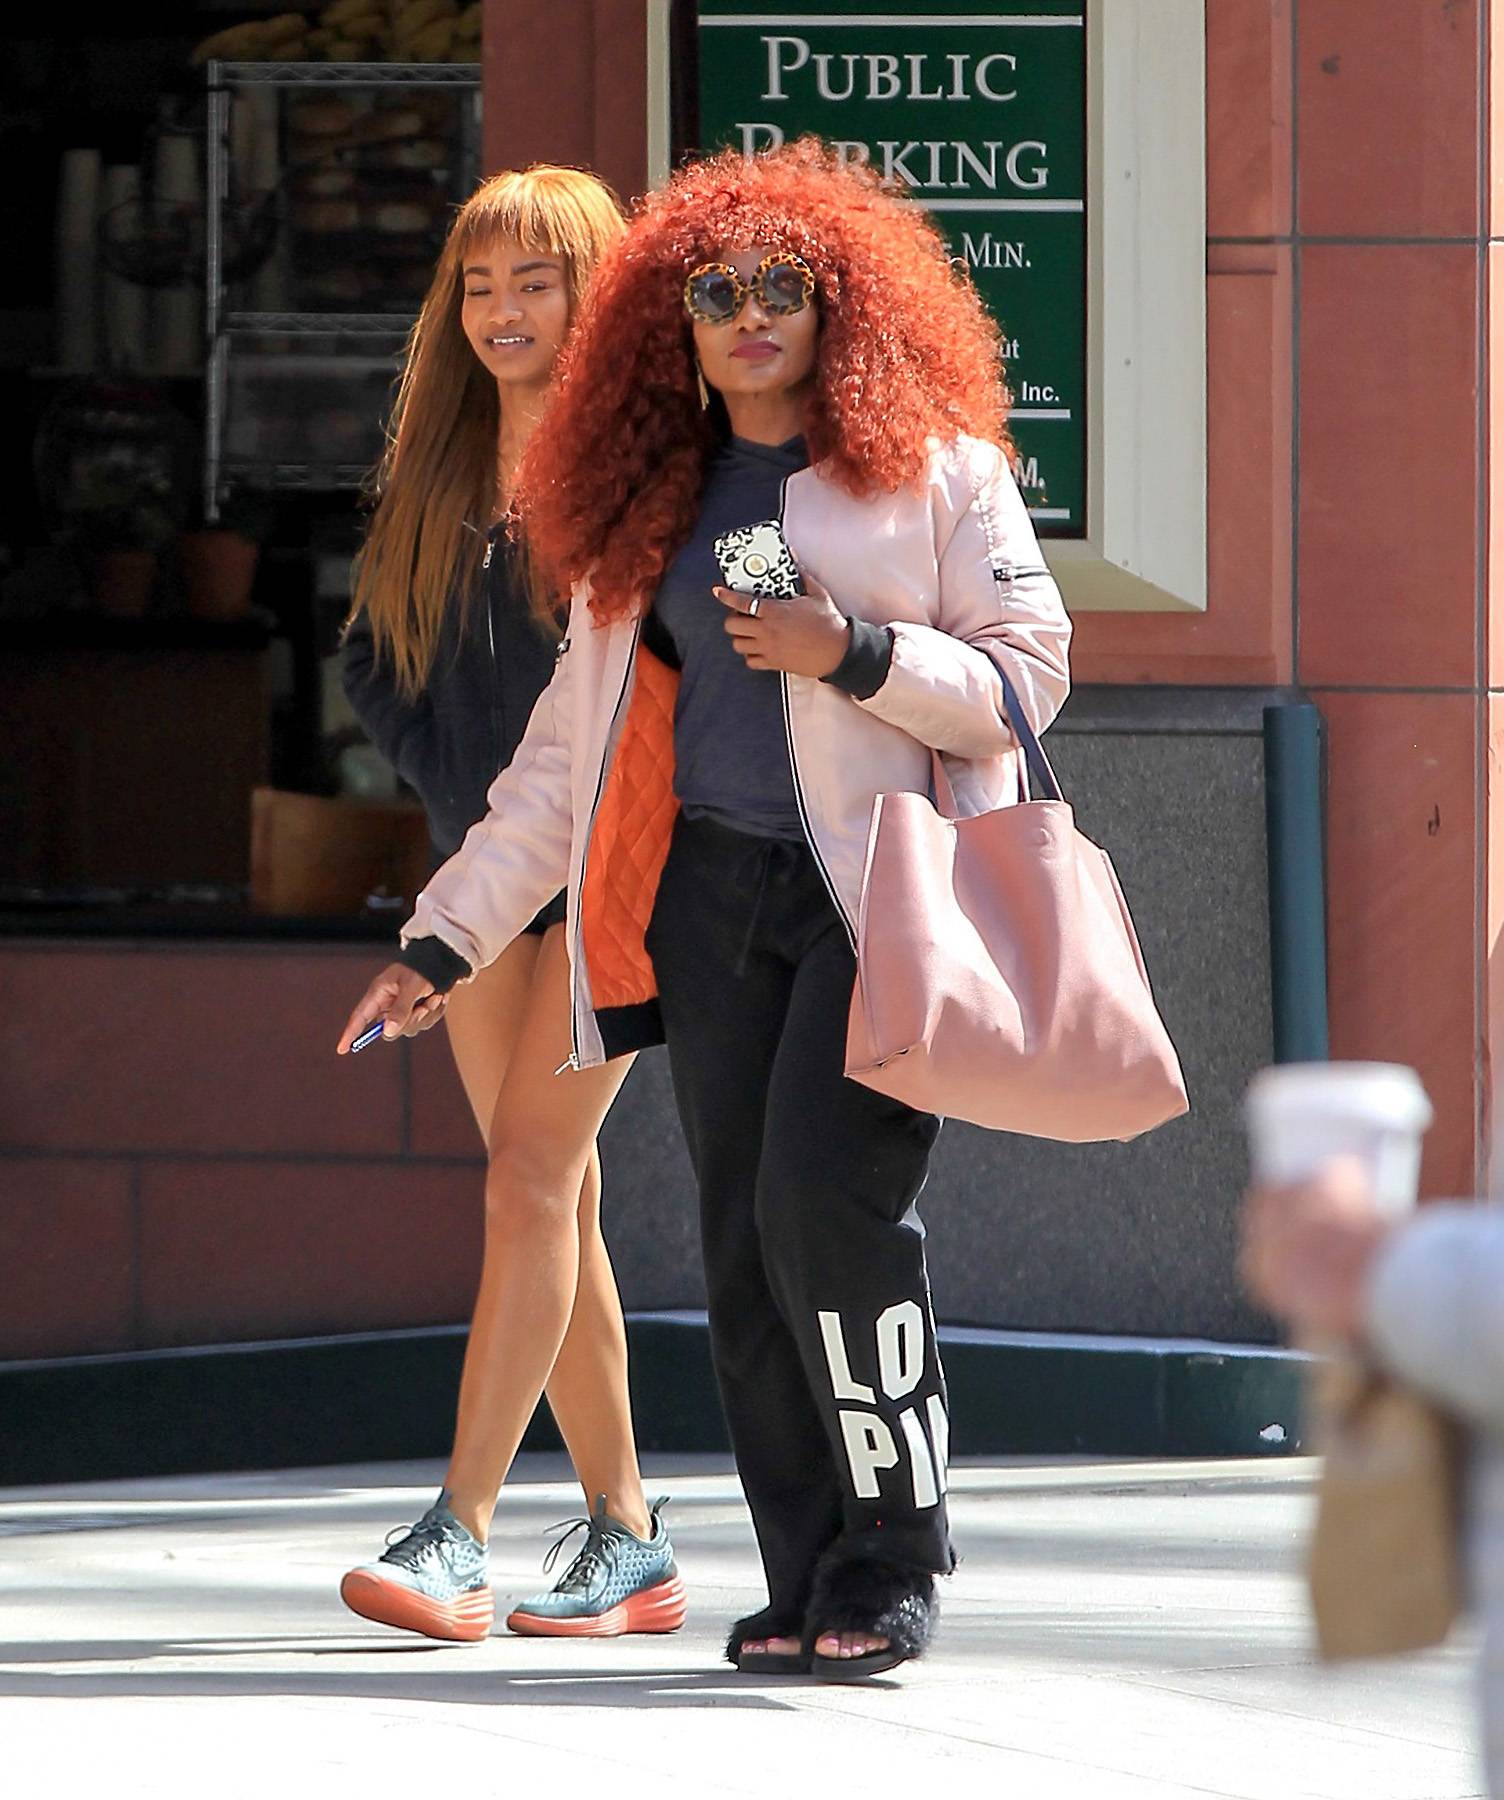 Jaden Smith - Jaden - Image 20 from Out and About: EJ Johnson's